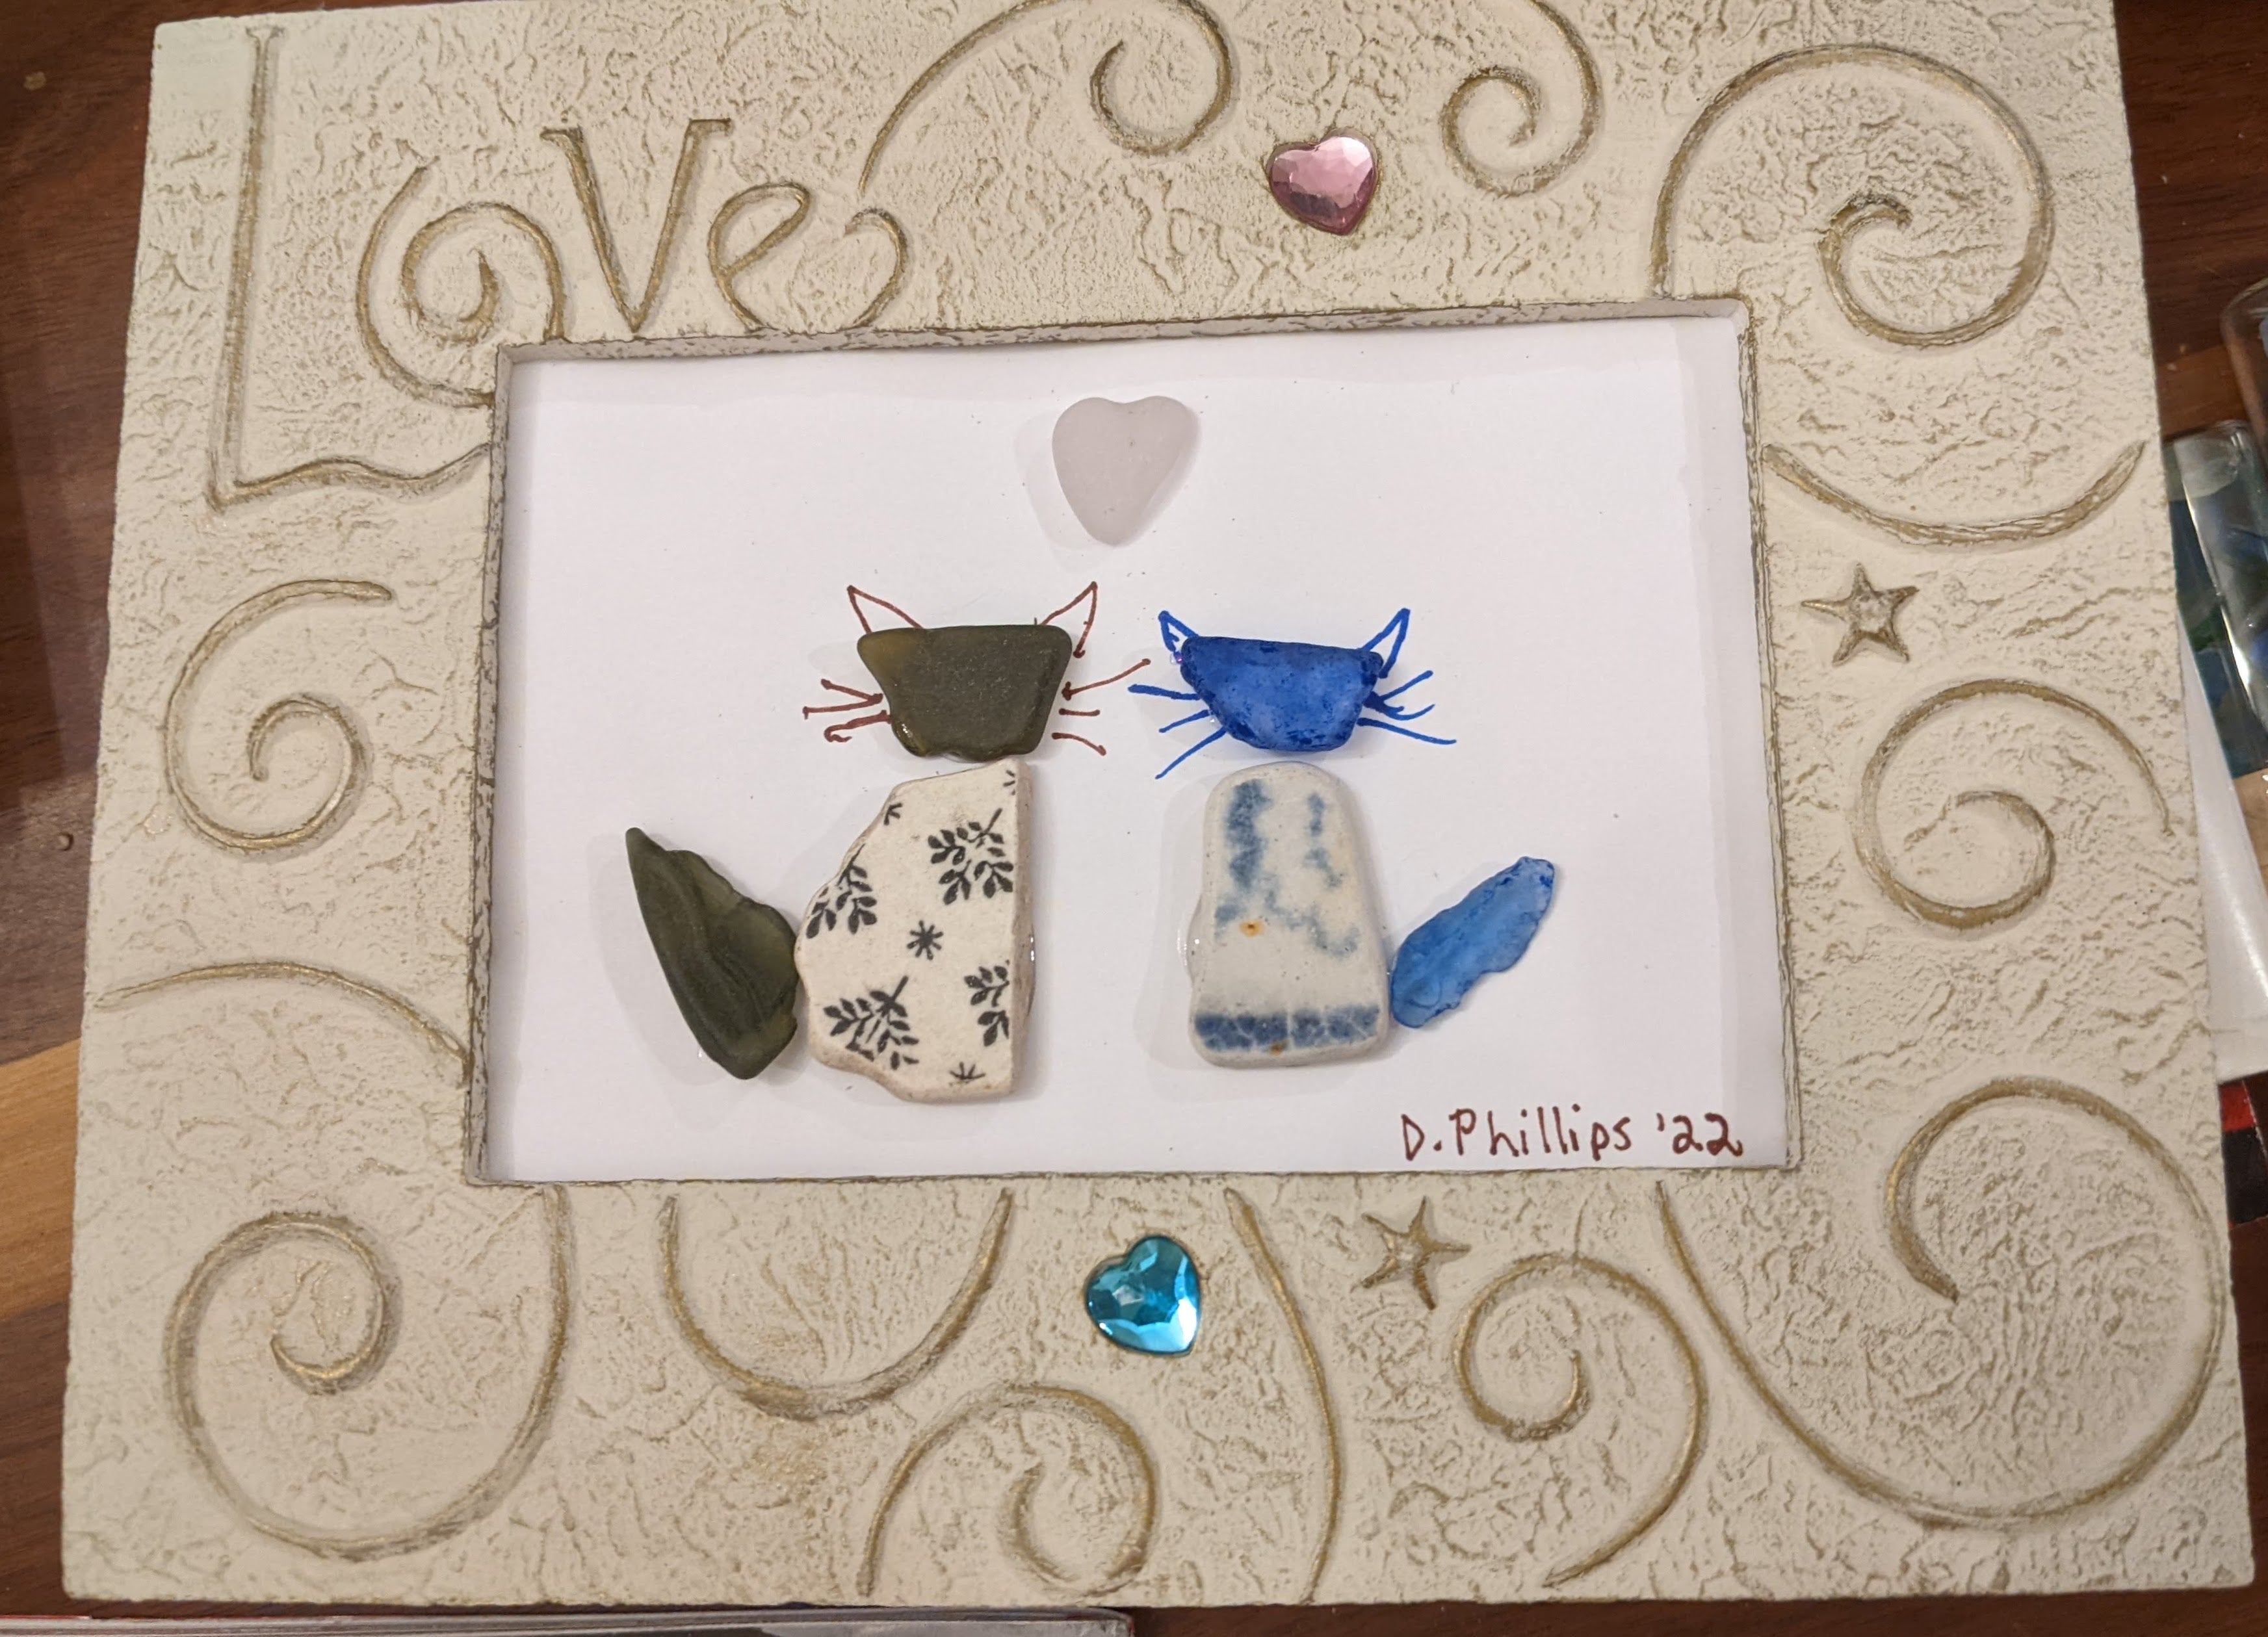 Two seaglass and sea pottery cats in Love frame